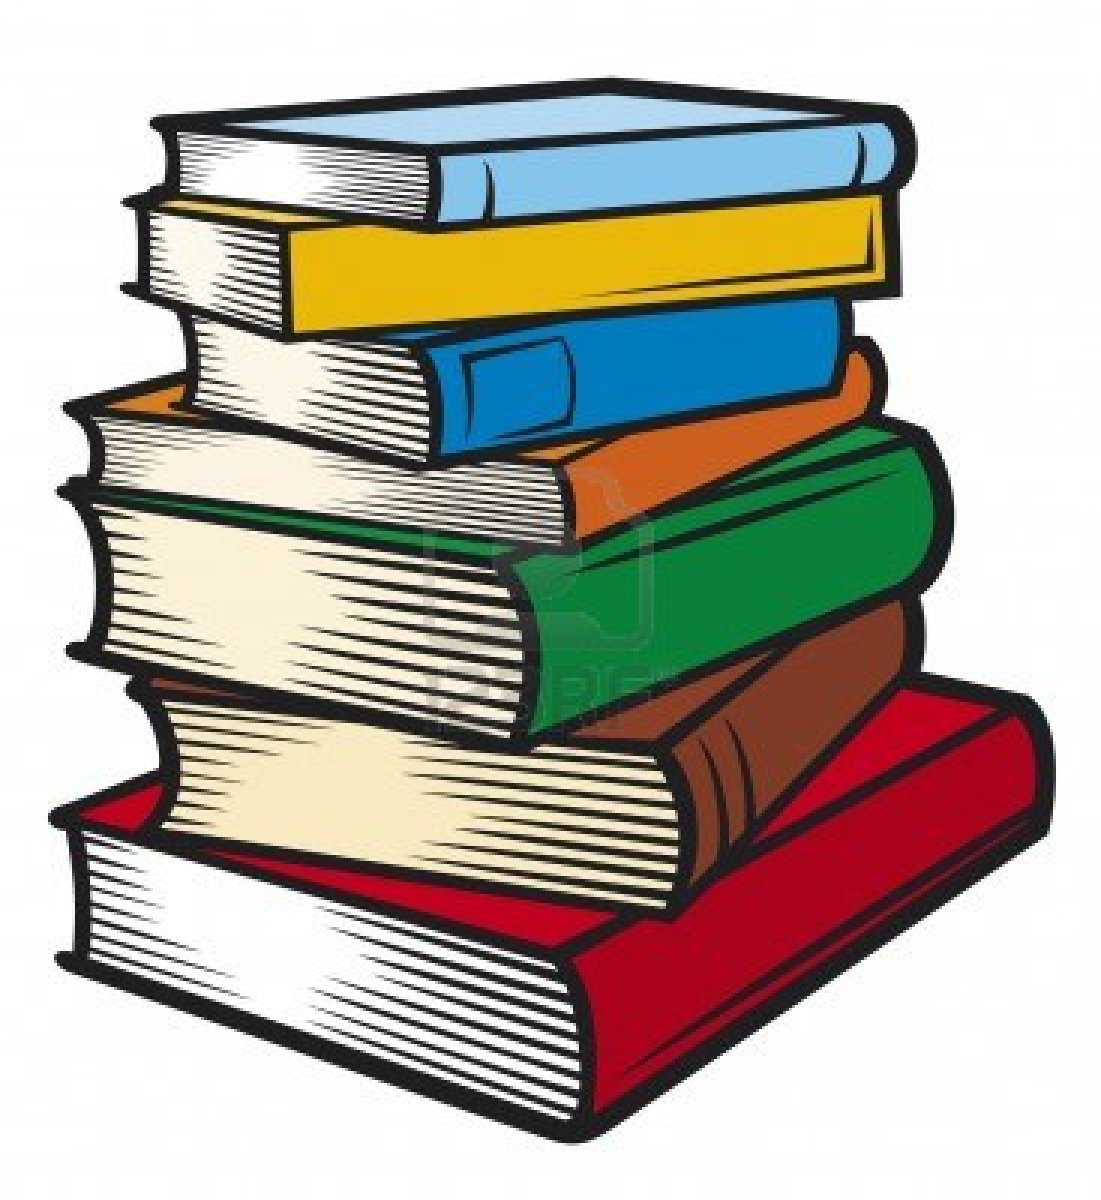 Free Picture Of Books, Download Free Clip Art, Free Clip Art.